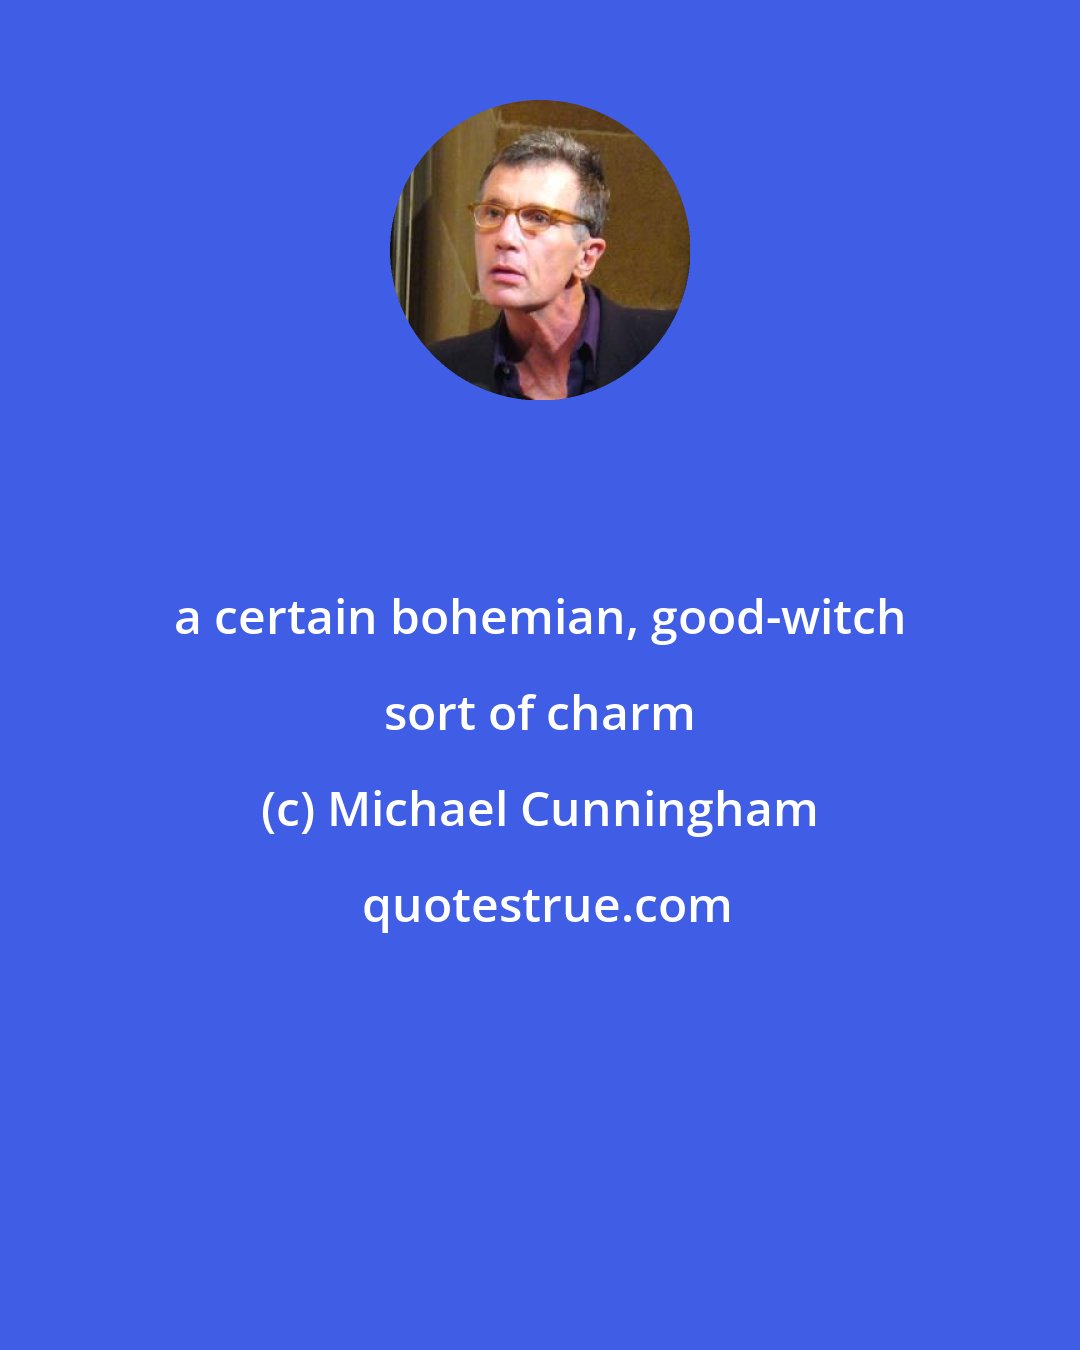 Michael Cunningham: a certain bohemian, good-witch sort of charm